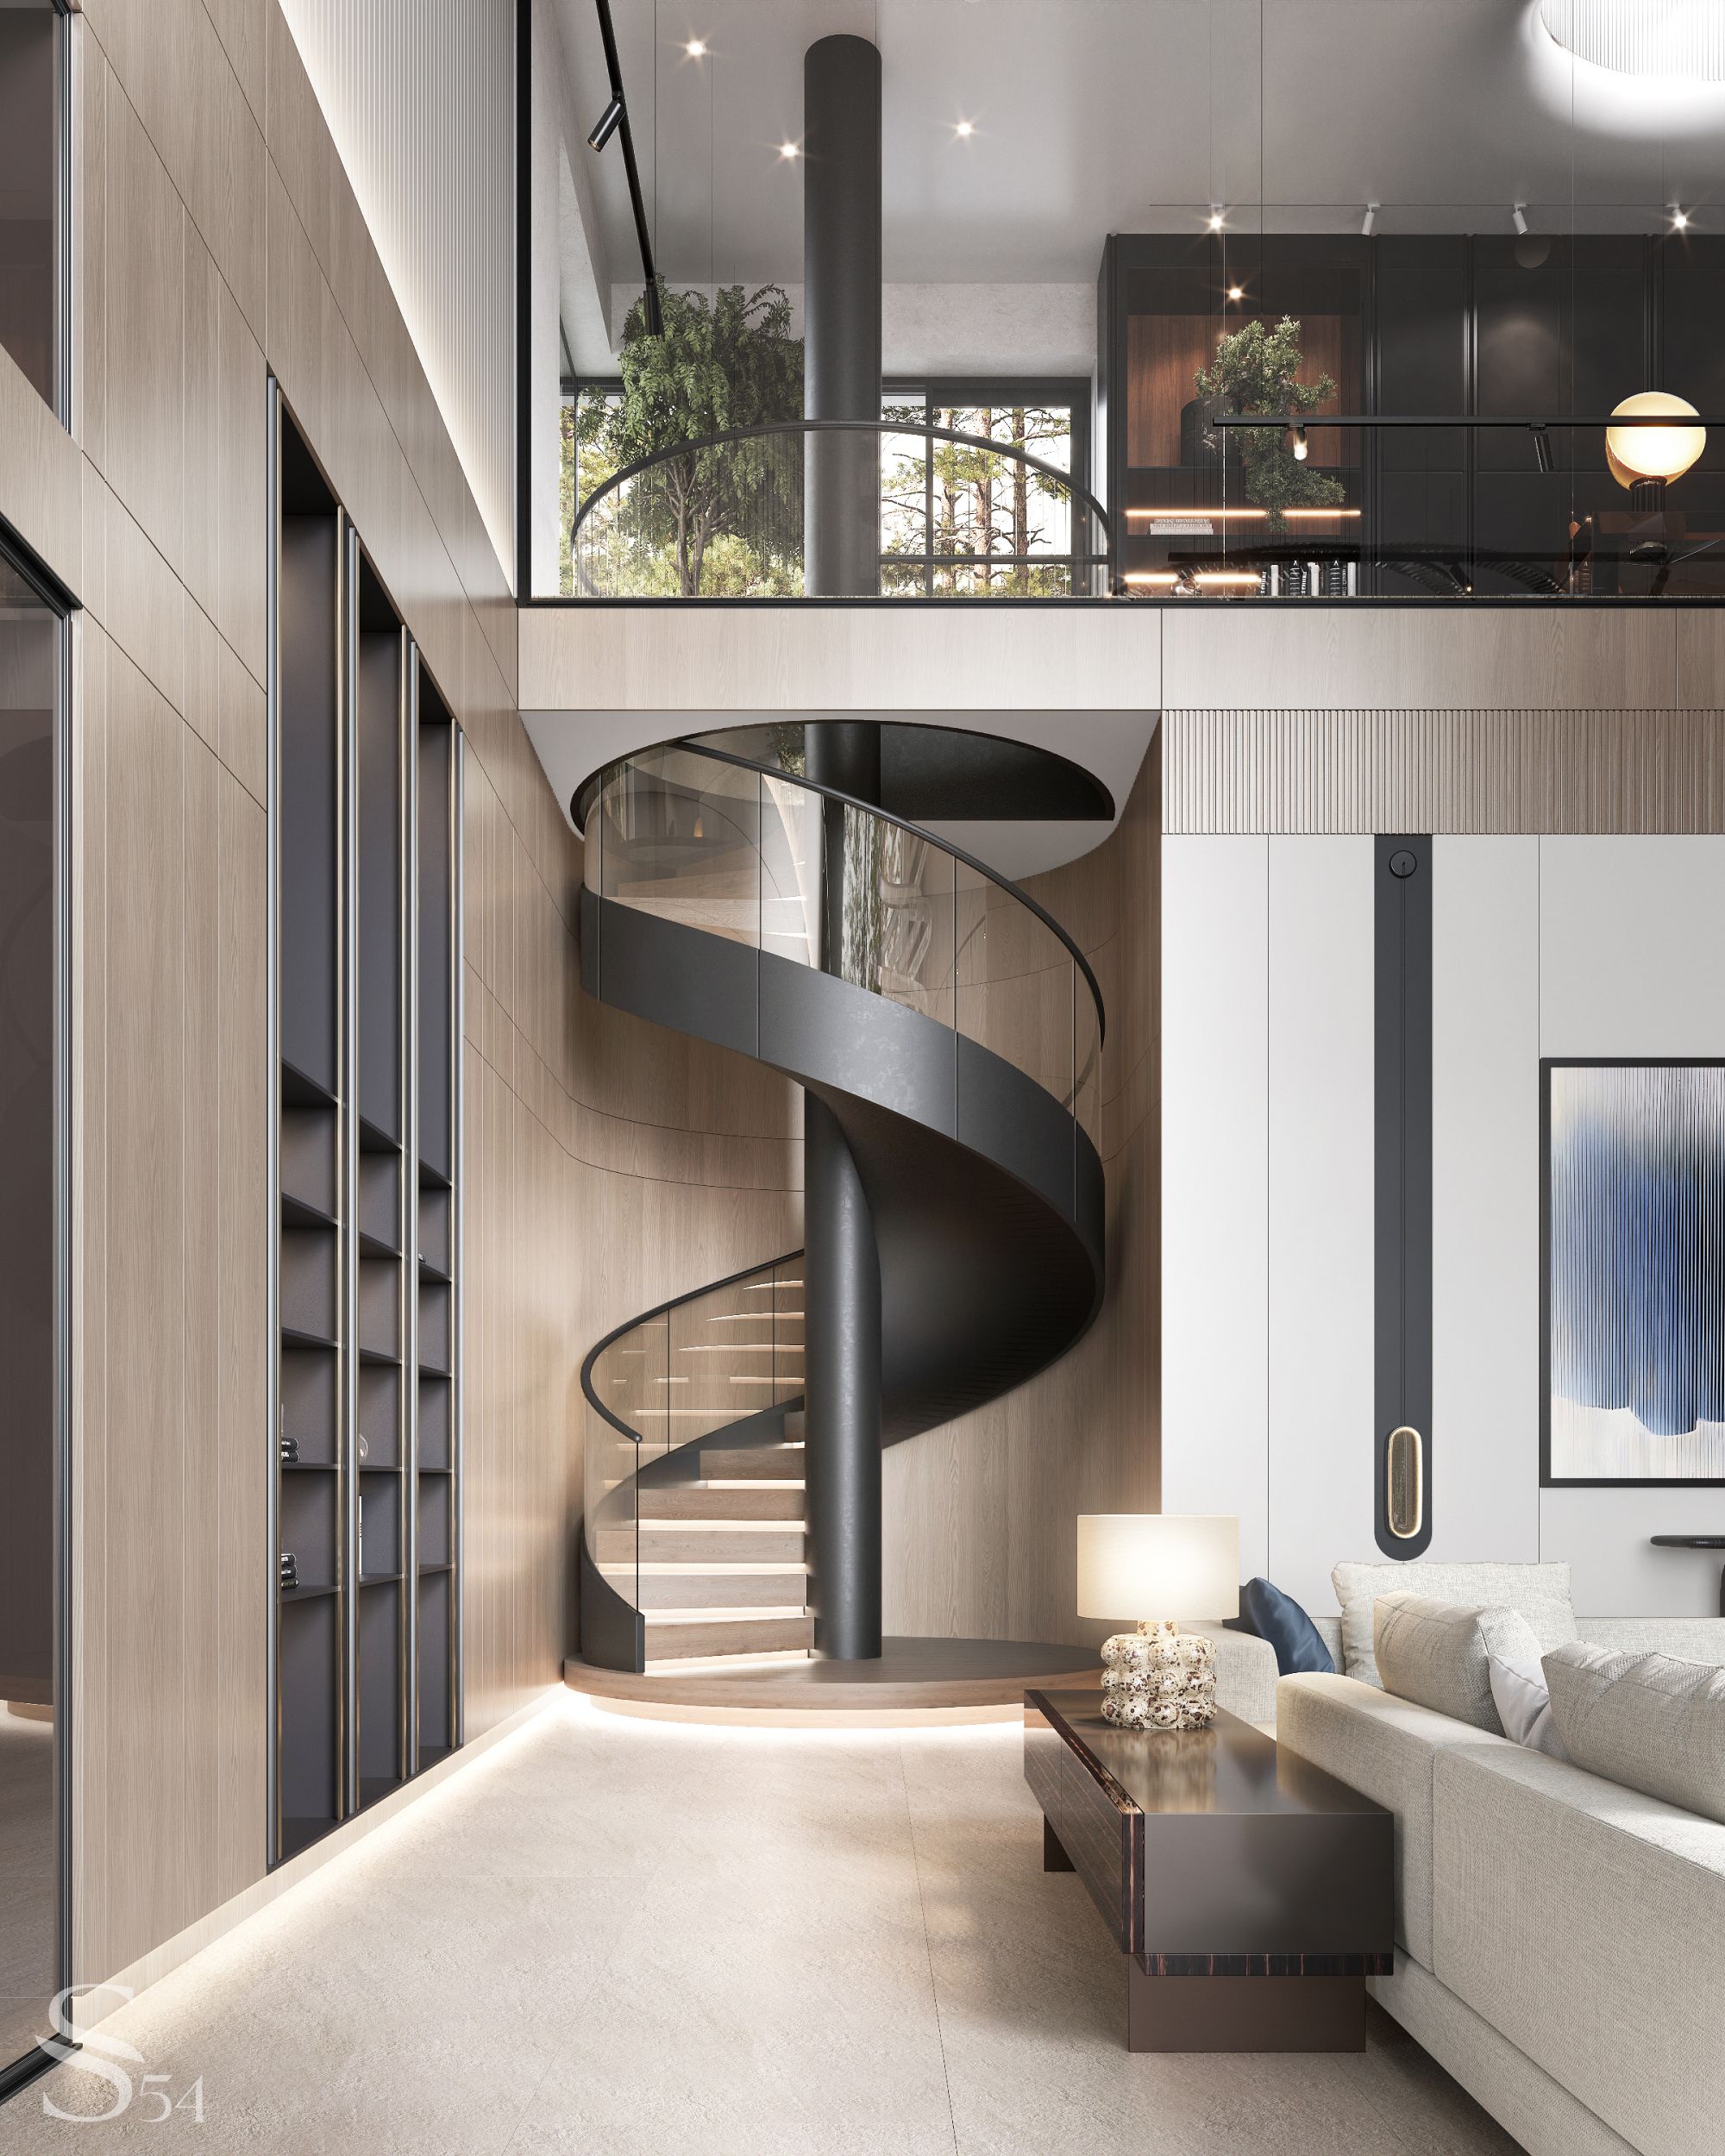 A spiral staircase leads to the second floor where the master suites are located
